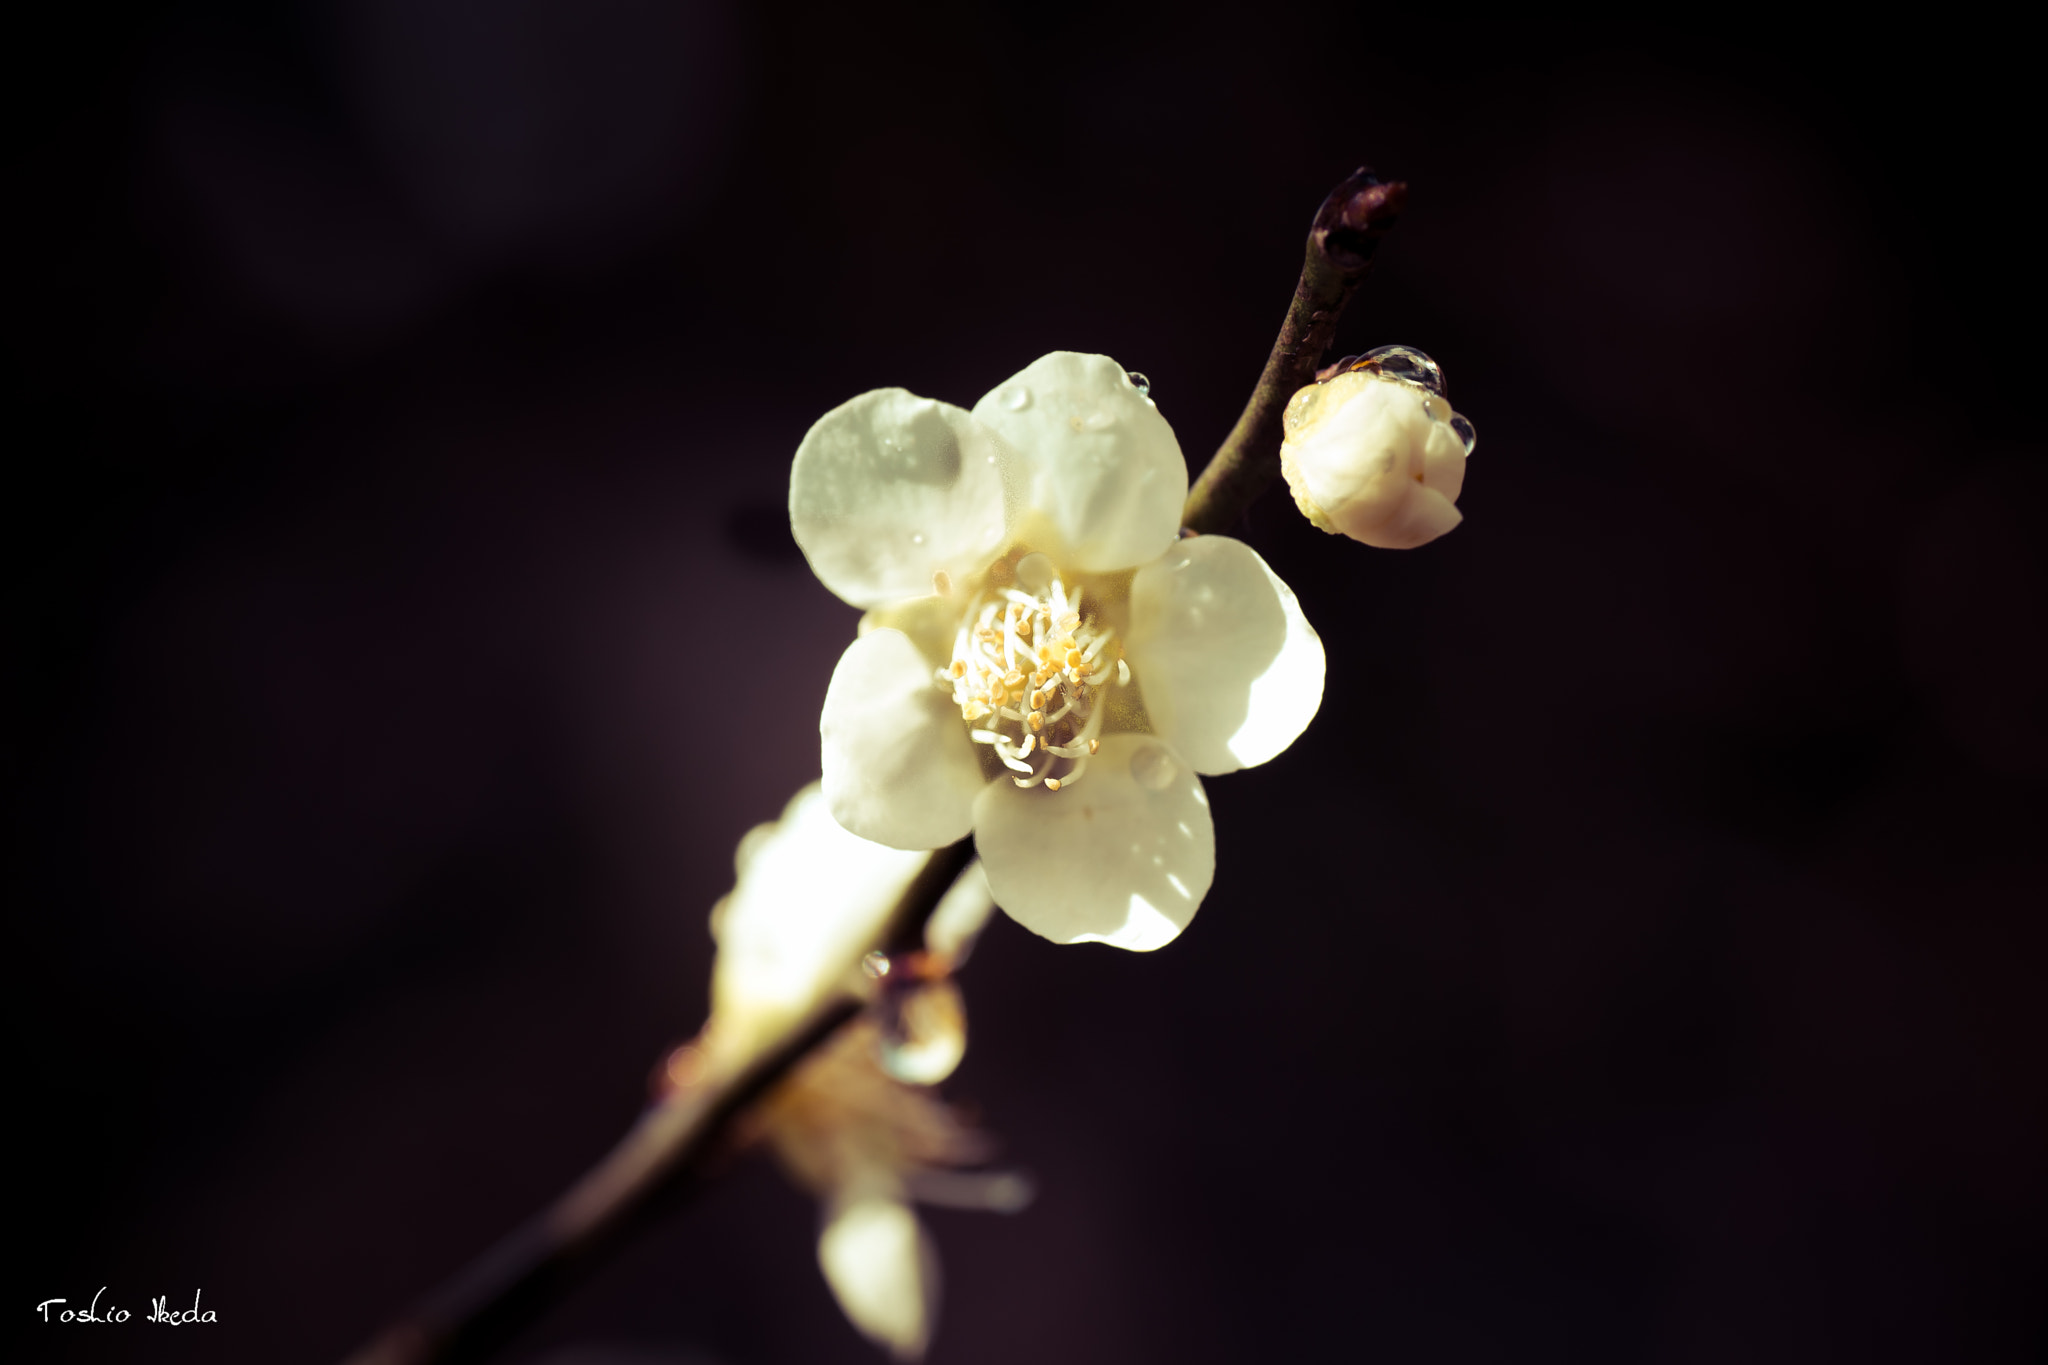 Sony SLT-A77 + Tamron SP AF 90mm F2.8 Di Macro sample photo. The plum blossoms photography